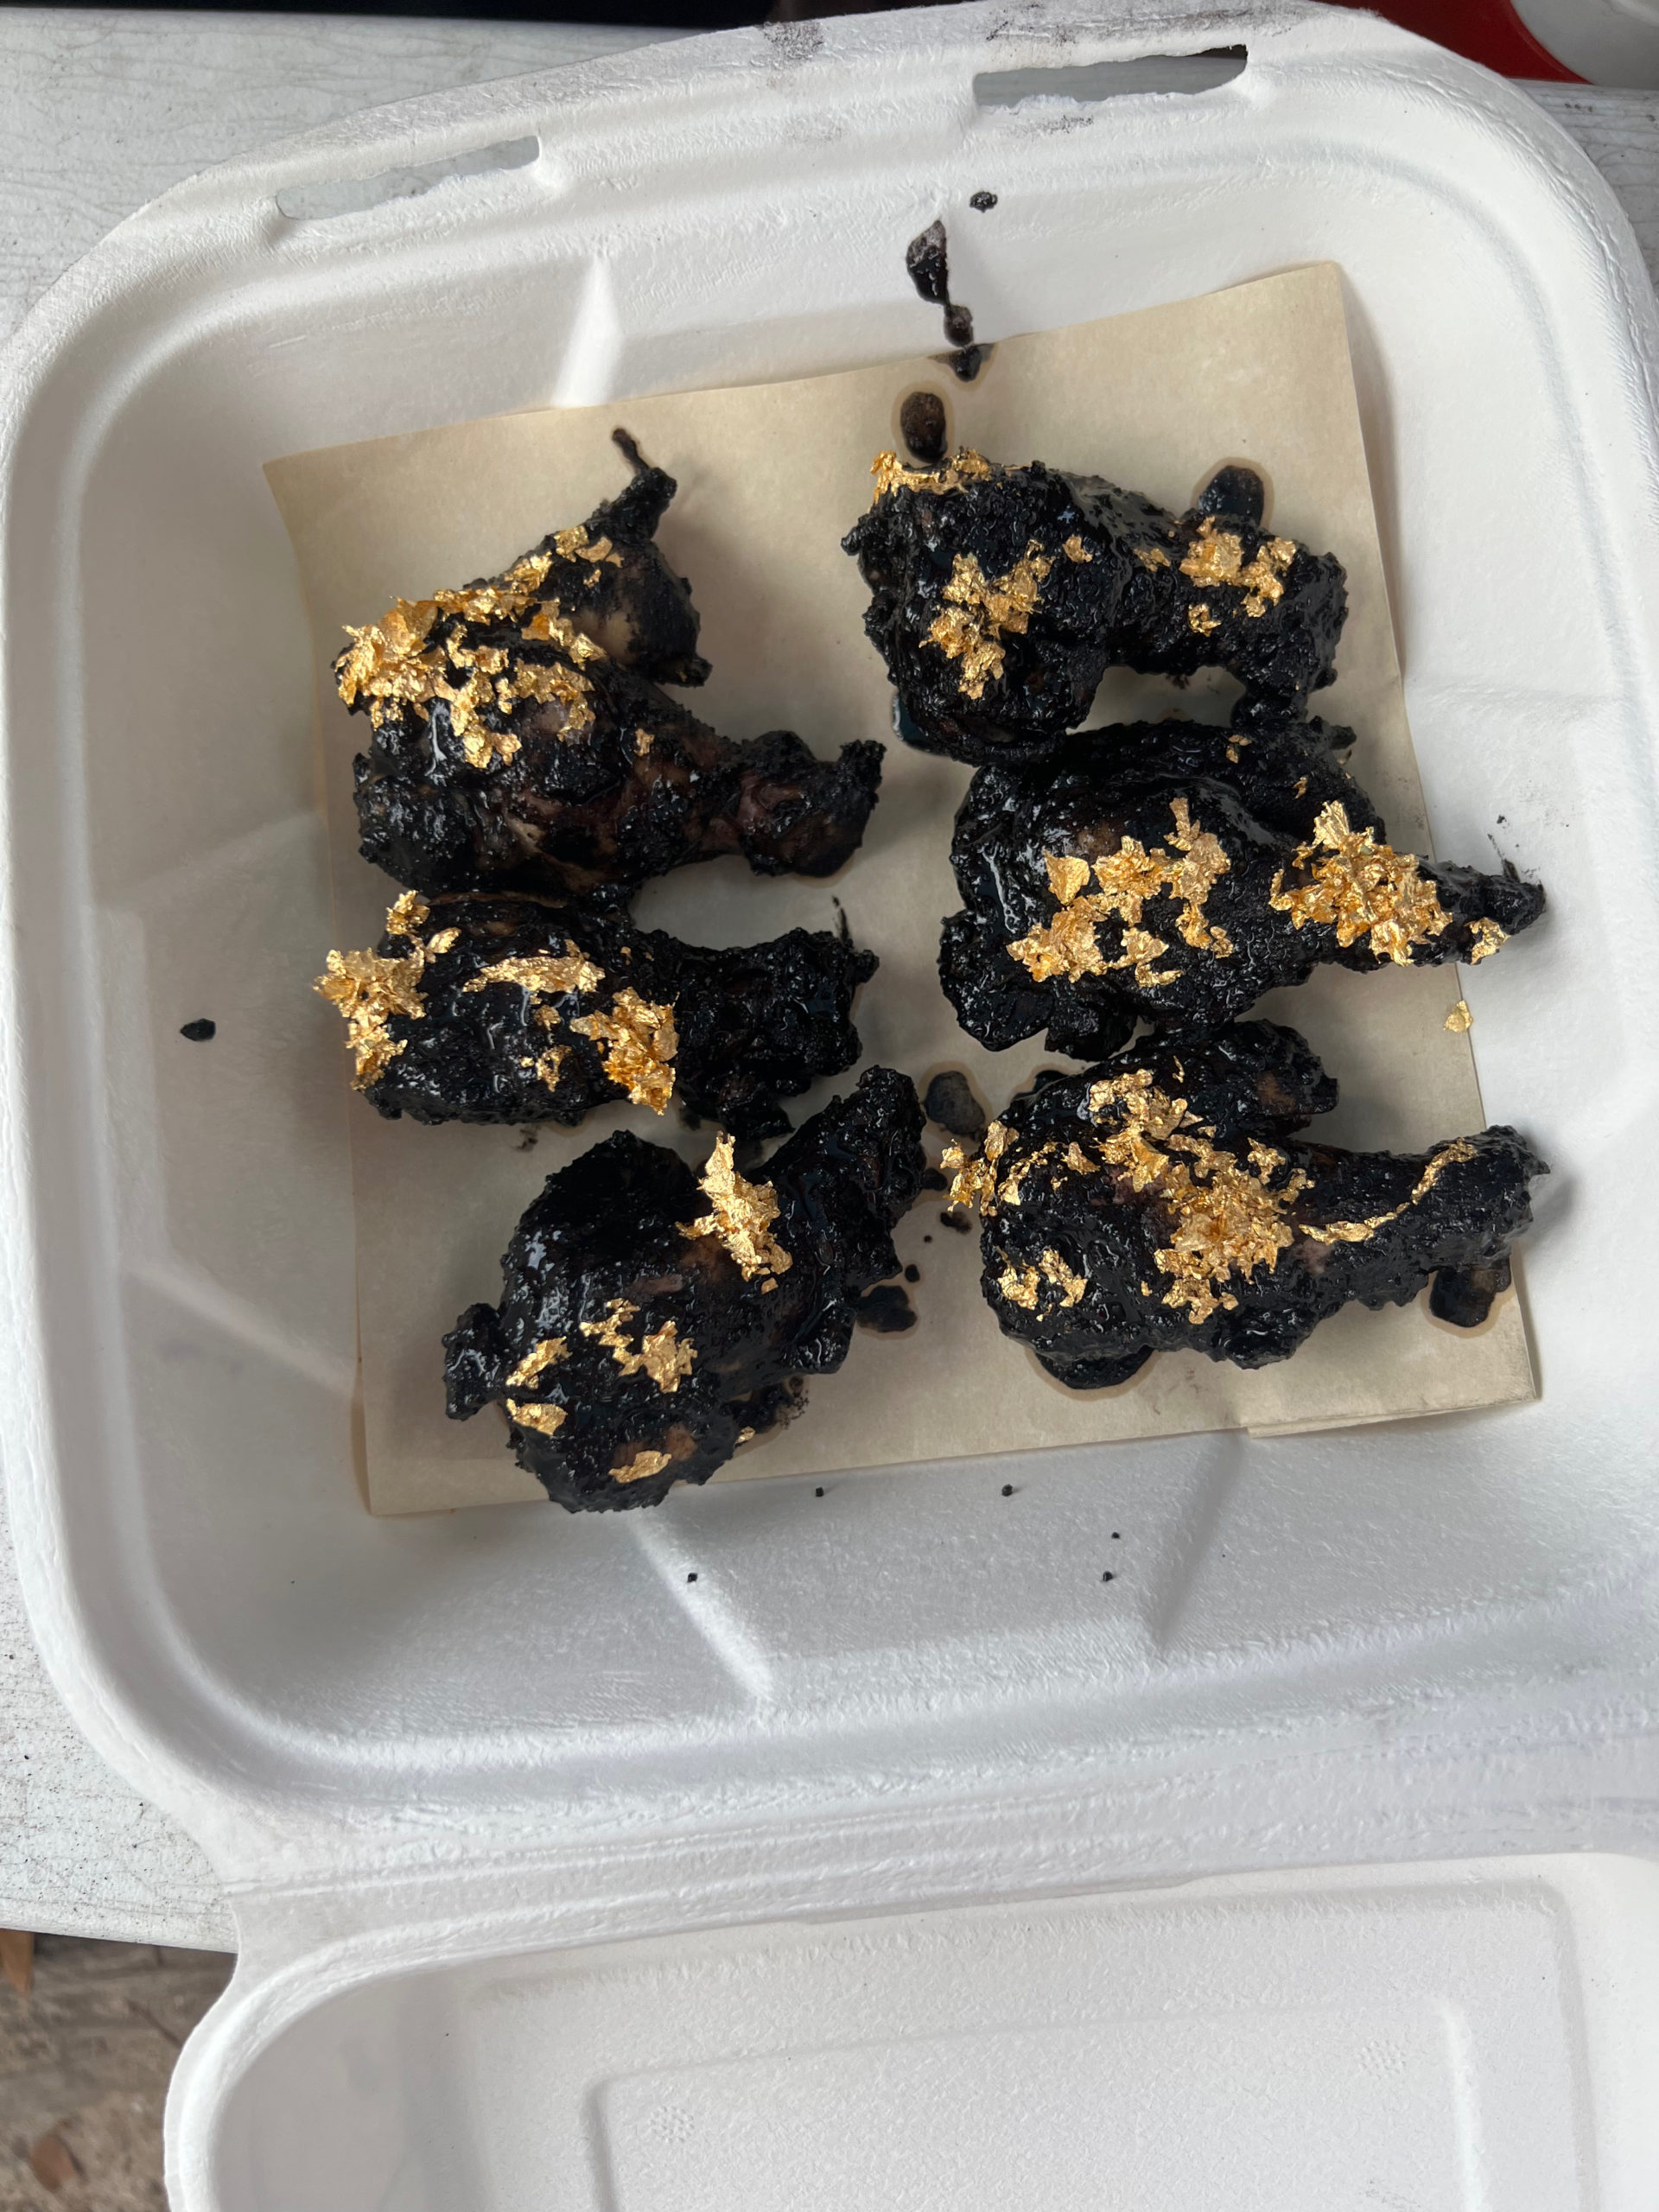 6 black chicken wings with gold flake rest on a paper in a cardboard take out container.